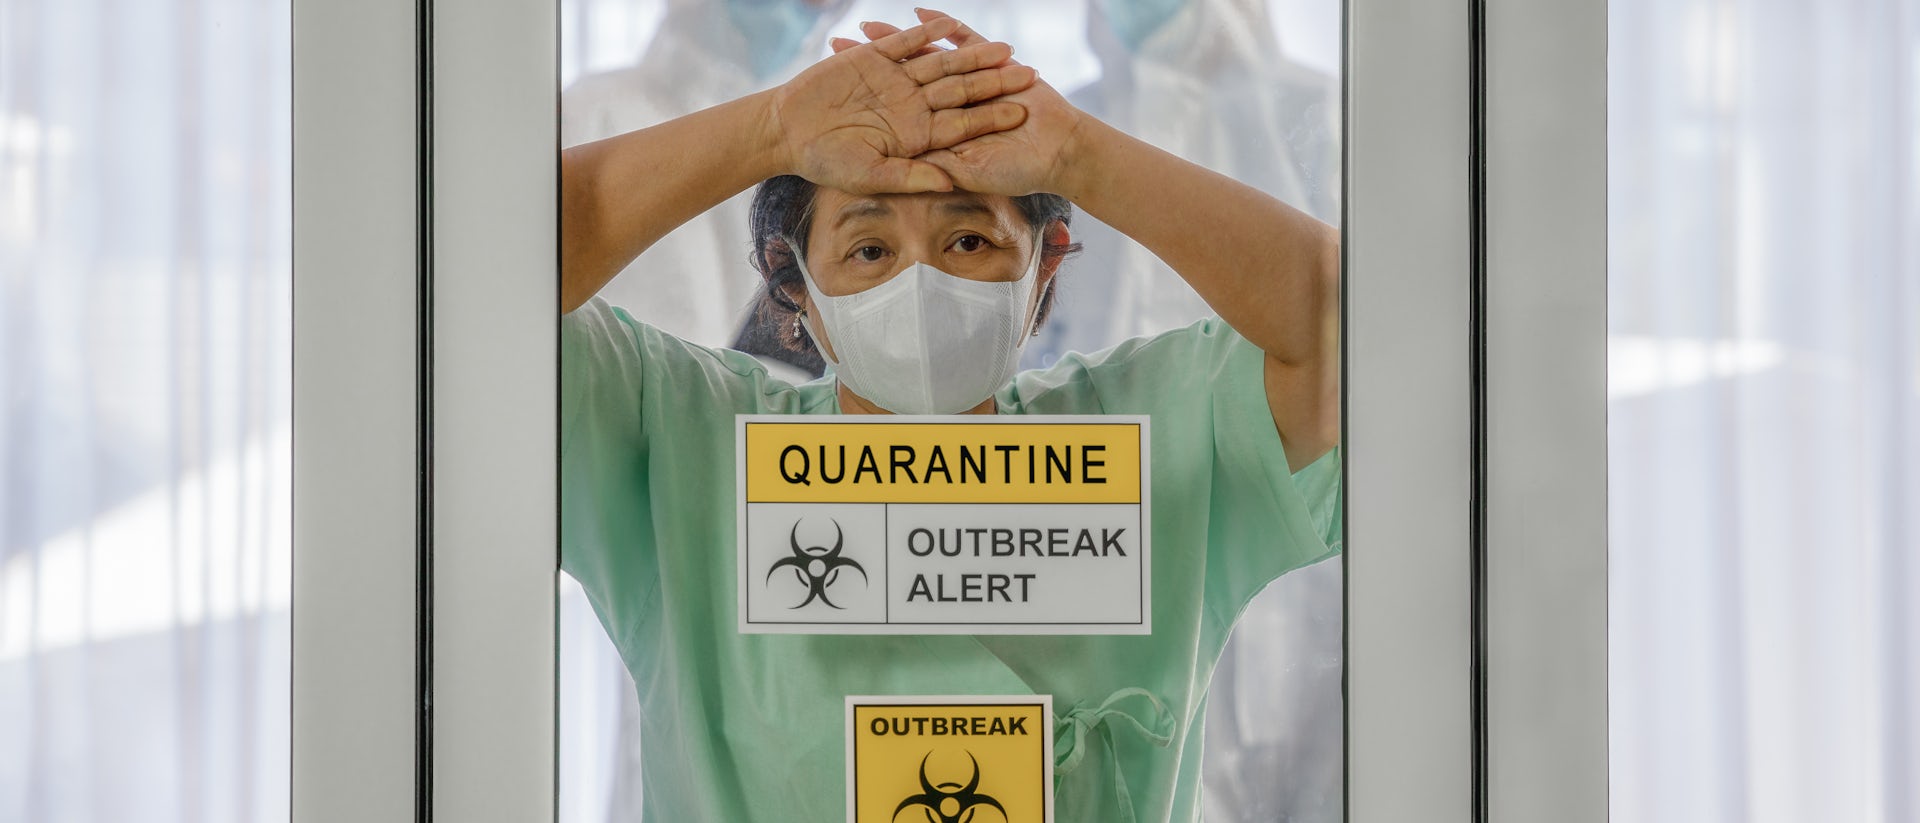 Worker sent this during quarantine fan pic